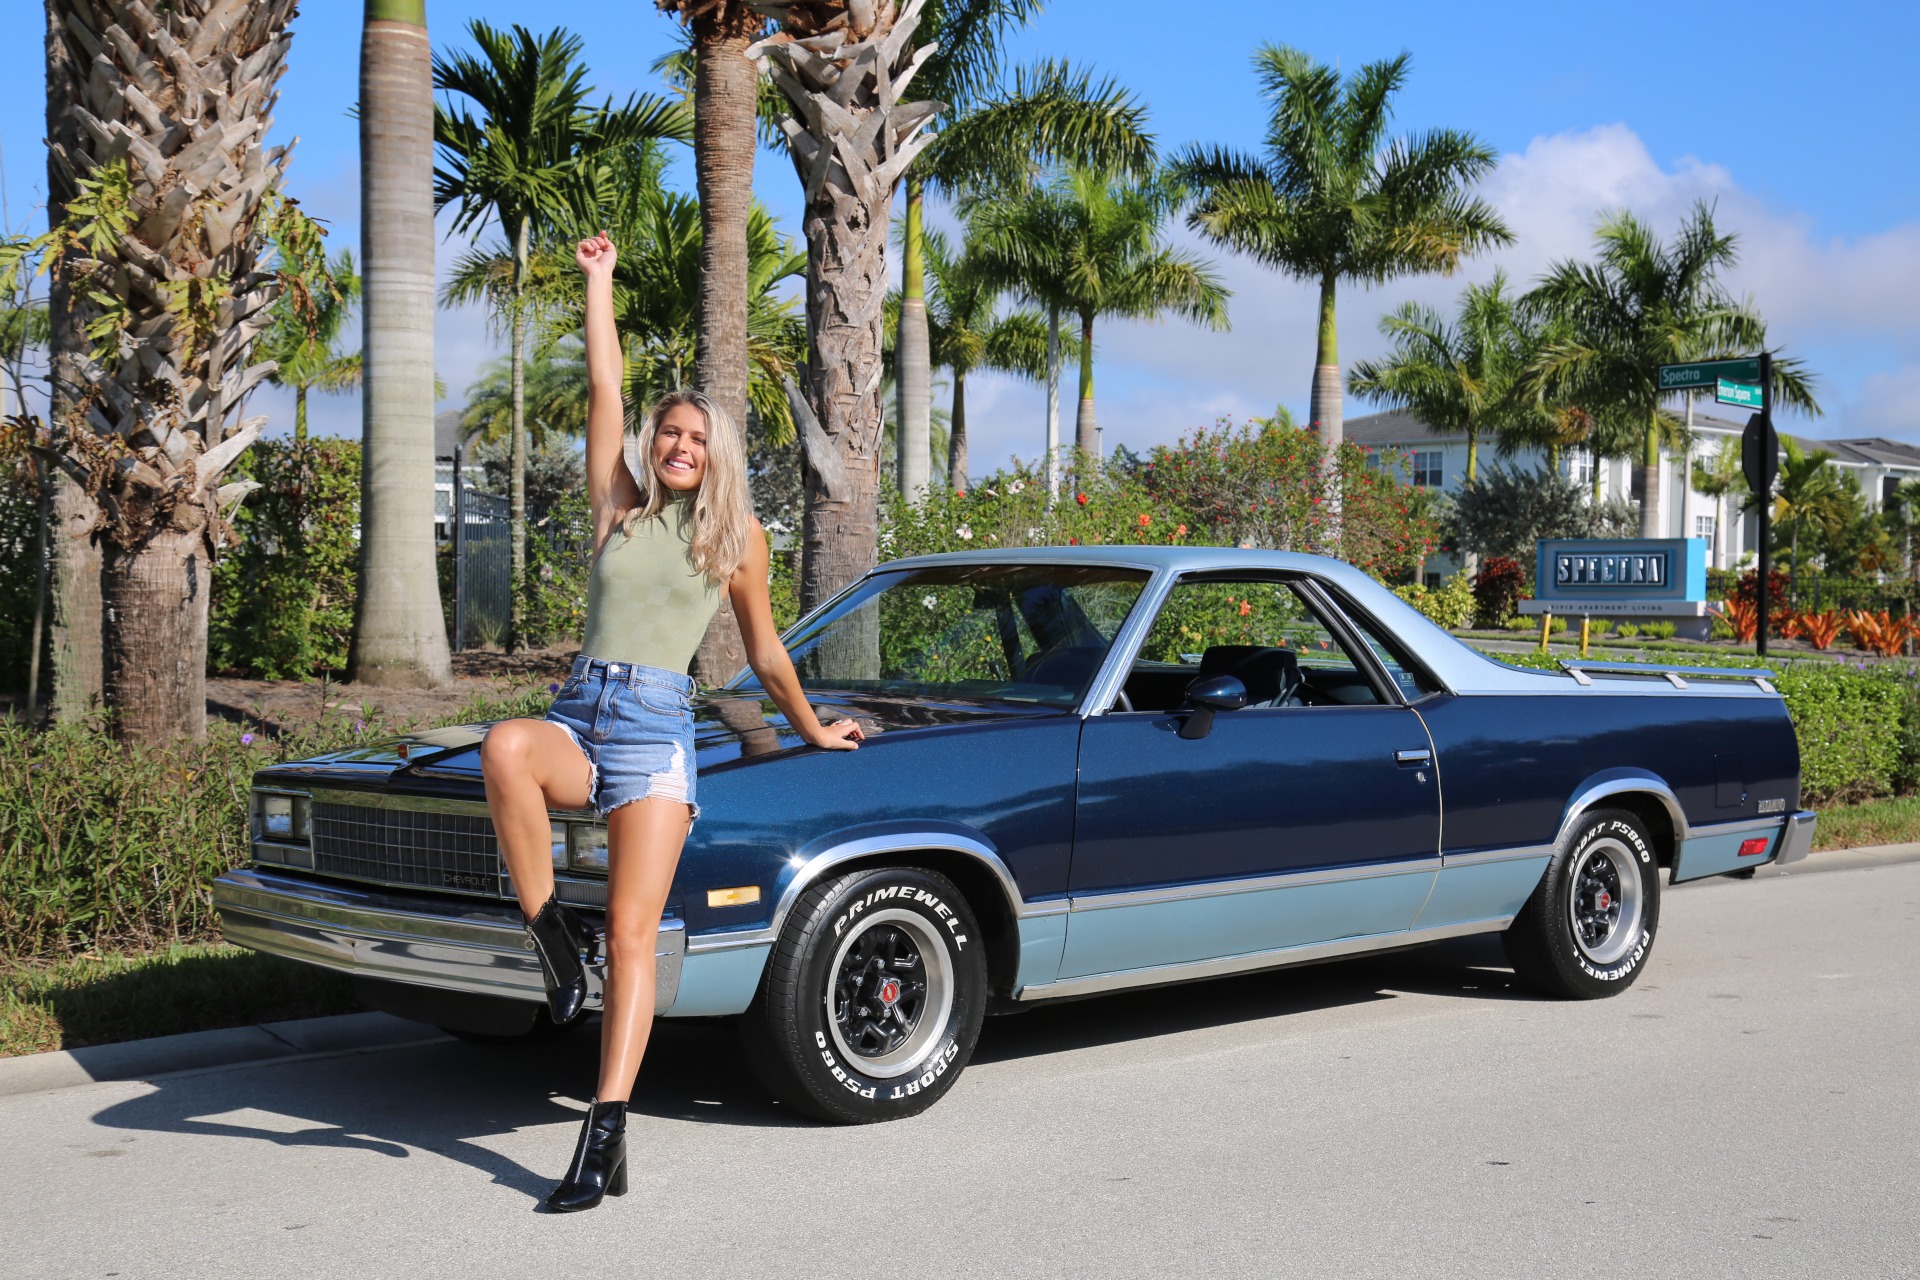 Used 1985 Chevrolet El Camino SS for sale Sold at Muscle Cars for Sale Inc. in Fort Myers FL 33912 1